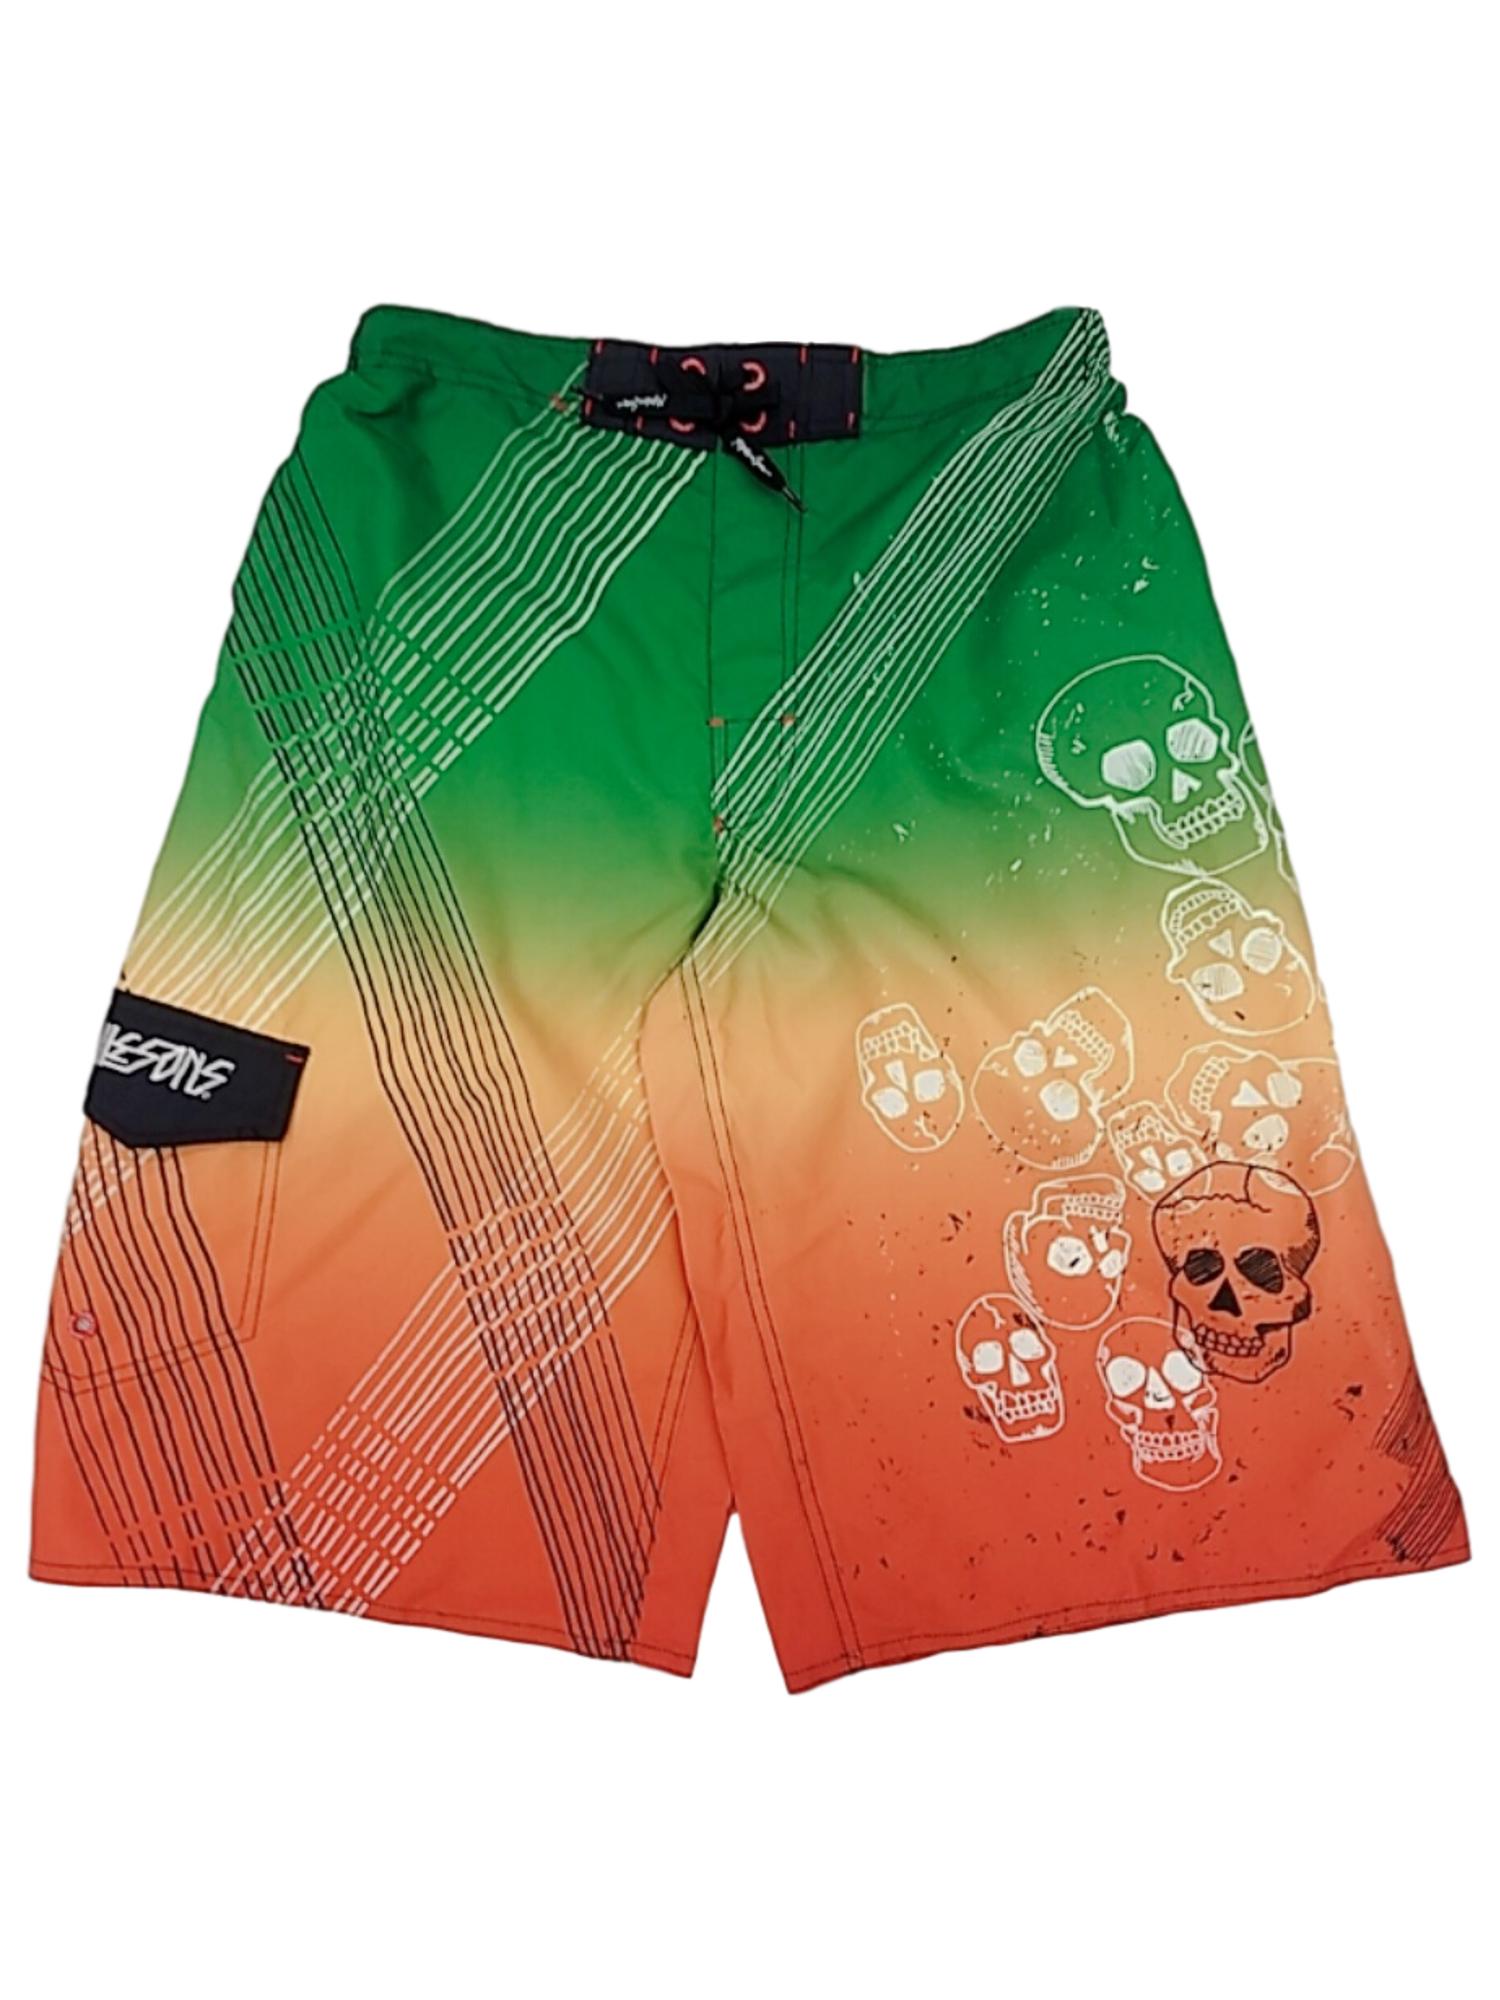 Swimsuit for Kids Maui /& Sons Boys Sublimation Printed E-Board Short